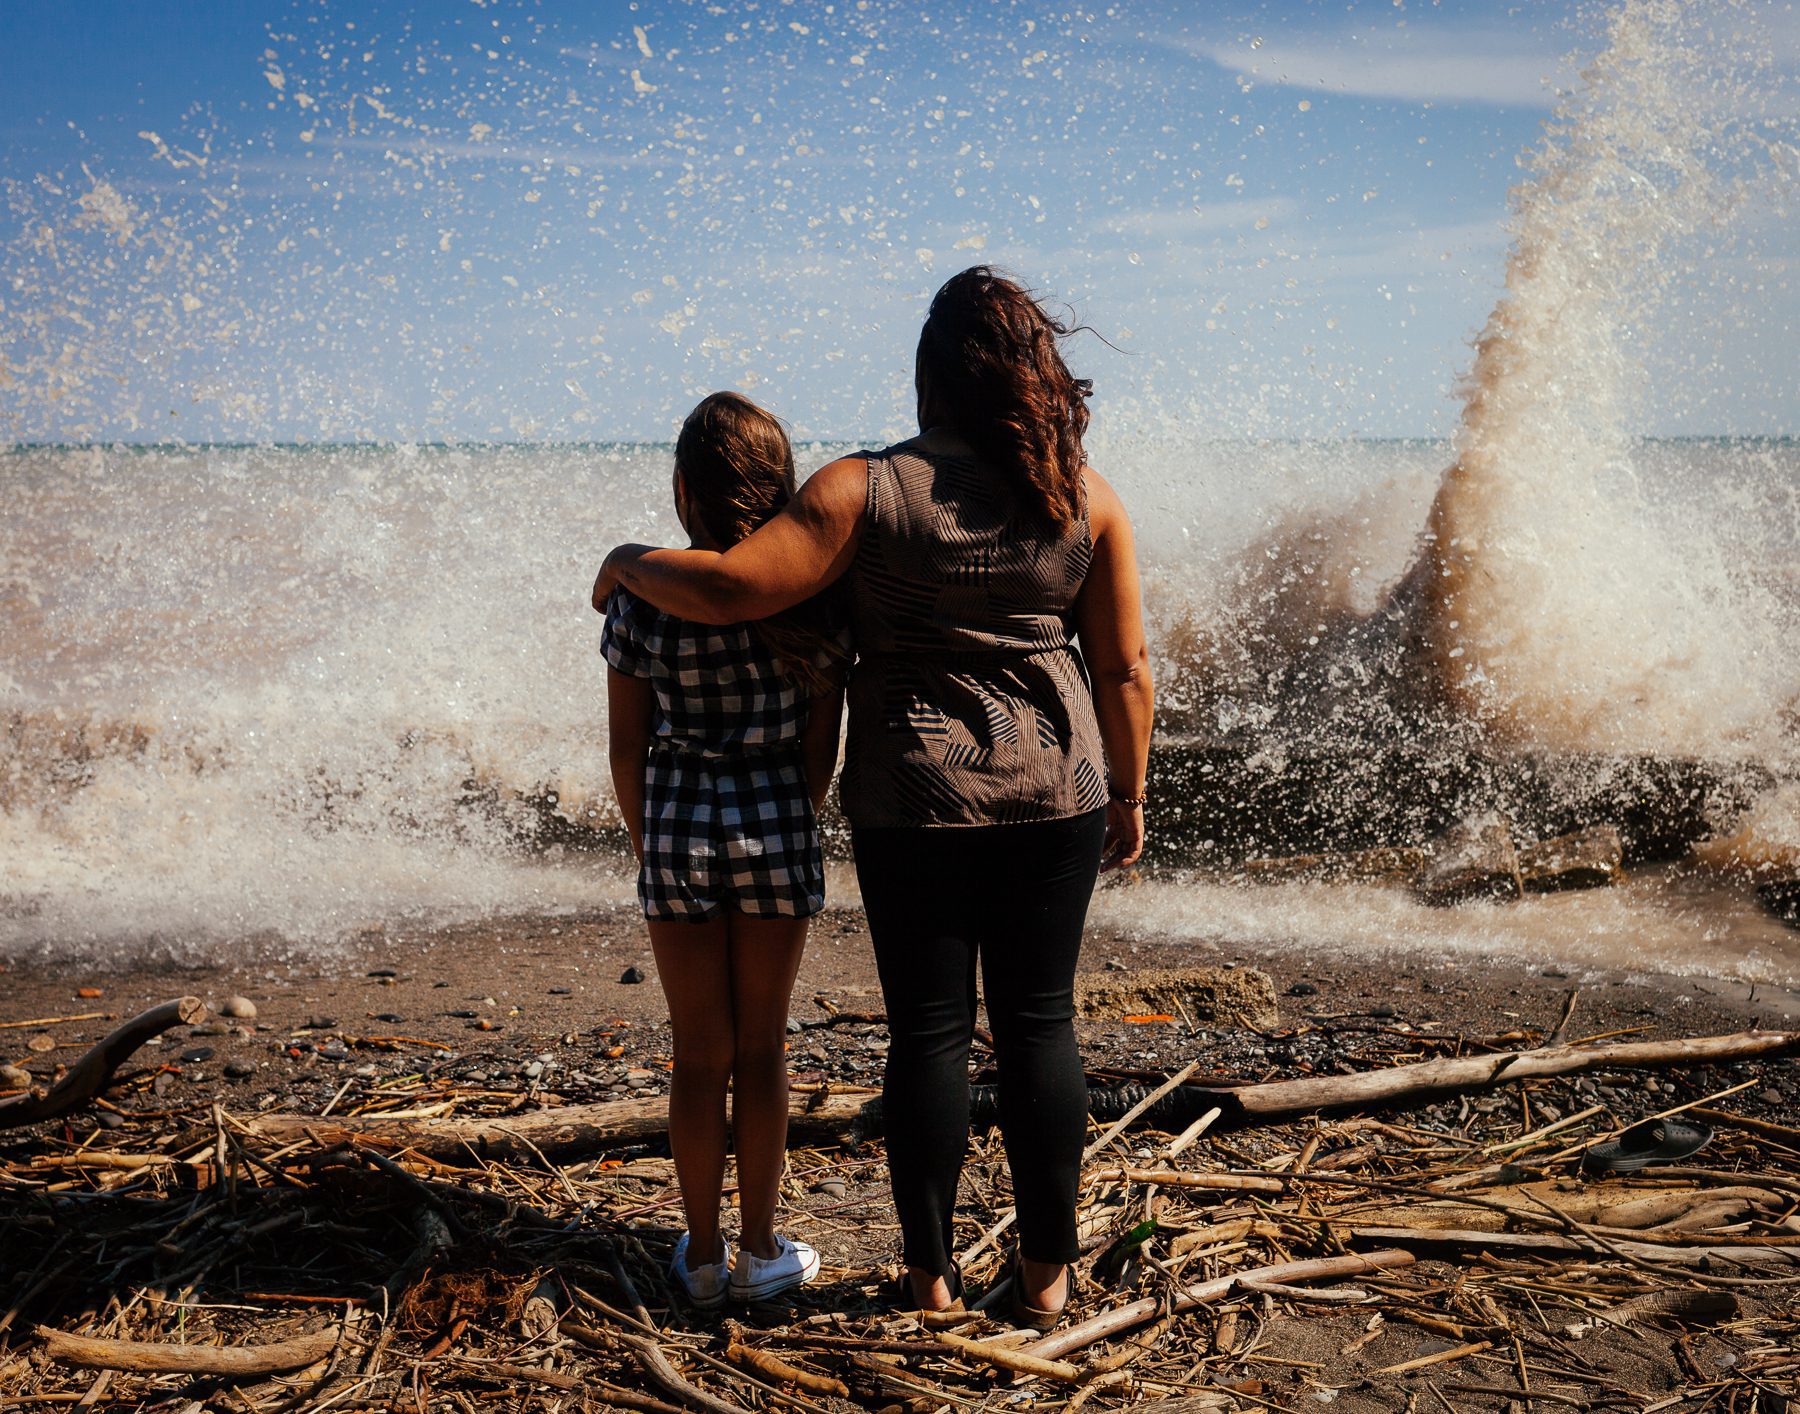 On both sides of Michelle's family, her ancestors migrated to Canada to escape slavery in the United States. Looking out over Lake Erie Michelle reflects on those who lost their lives as they tried to cross the lake and find safety and freedom. (Story and image by Colin Boyd Shafer)